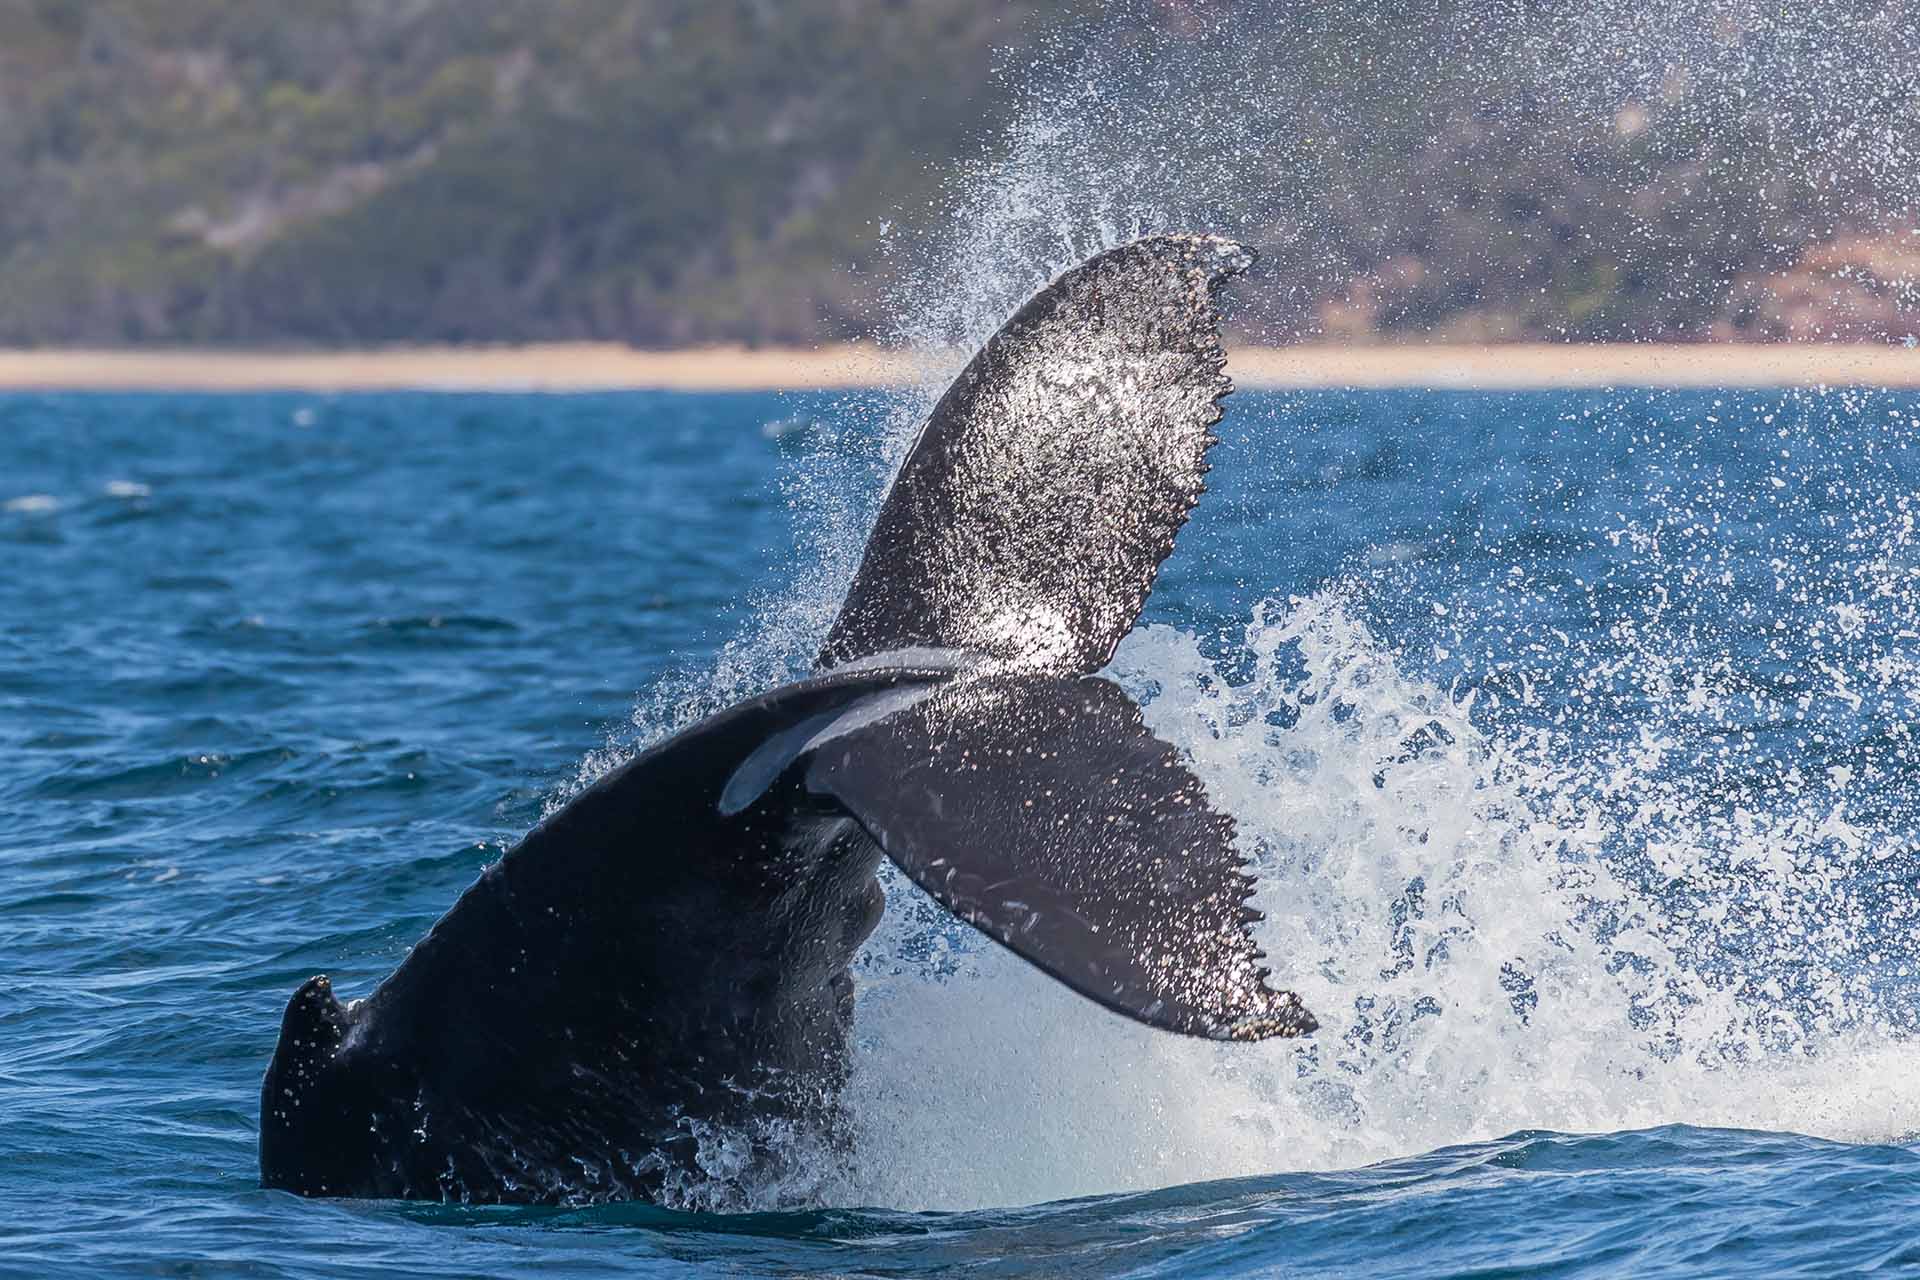 Whales, Humpback whales, whale watching, behaviour, moves, NSW, migration, south coast, tail throw, tail throwing, whale tail